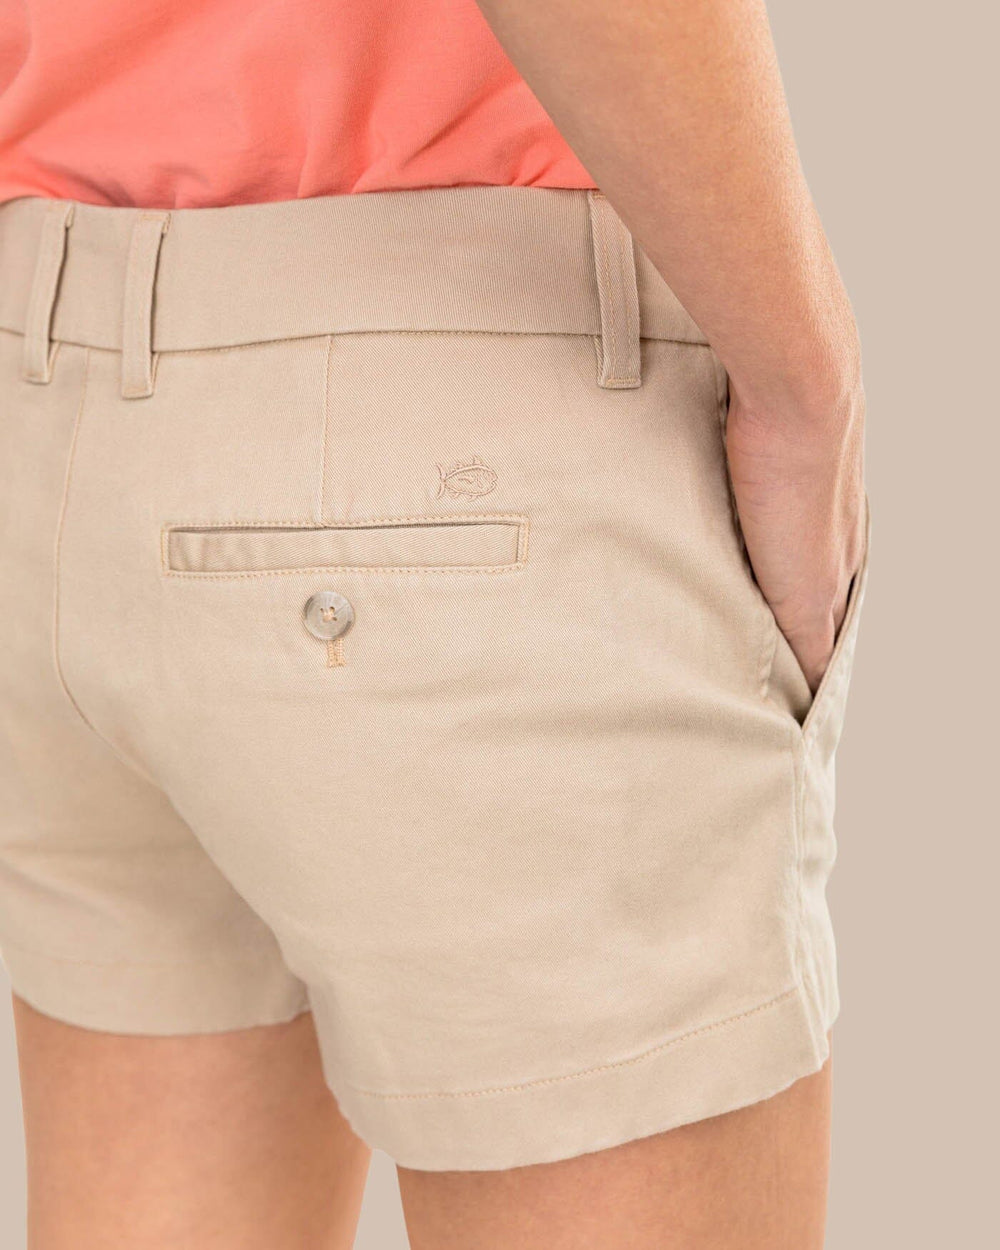 The pocket view of the Women's Khaki 3 Inch Leah Short by Southern Tide - Driftwood Khaki